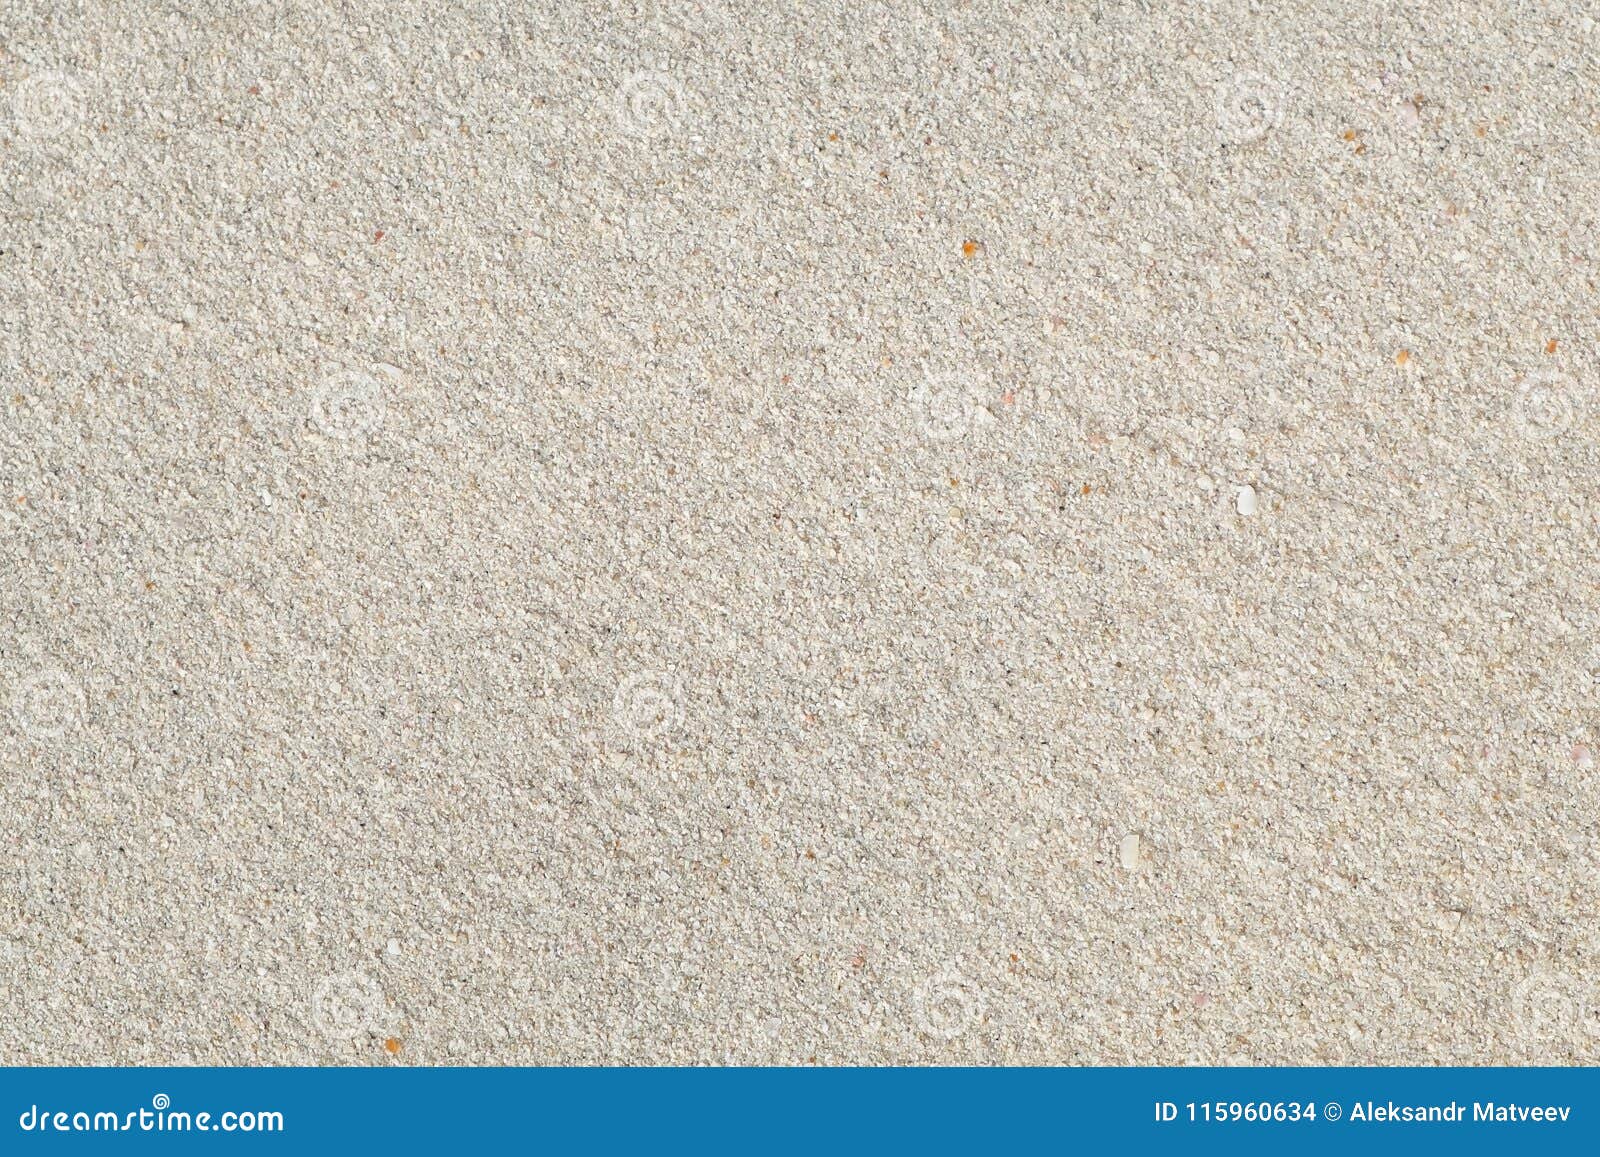 Natural Sand Pattern Texture Background Stock Photo - Image of color ...